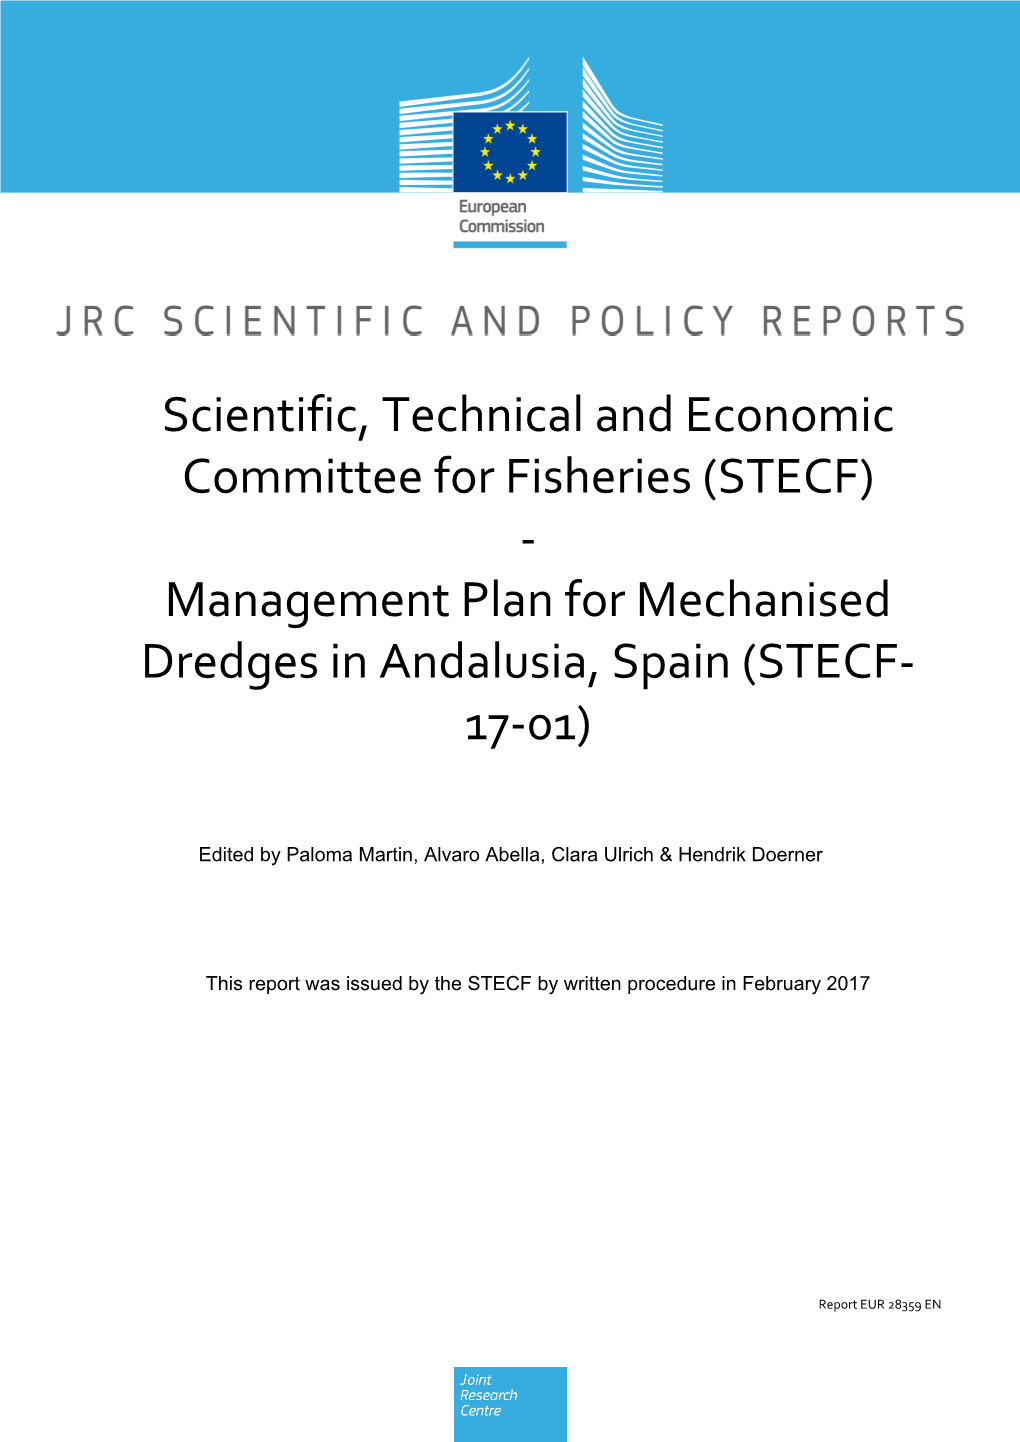 STECF) - Management Plan for Mechanised Dredges in Andalusia, Spain (STECF- 17-01